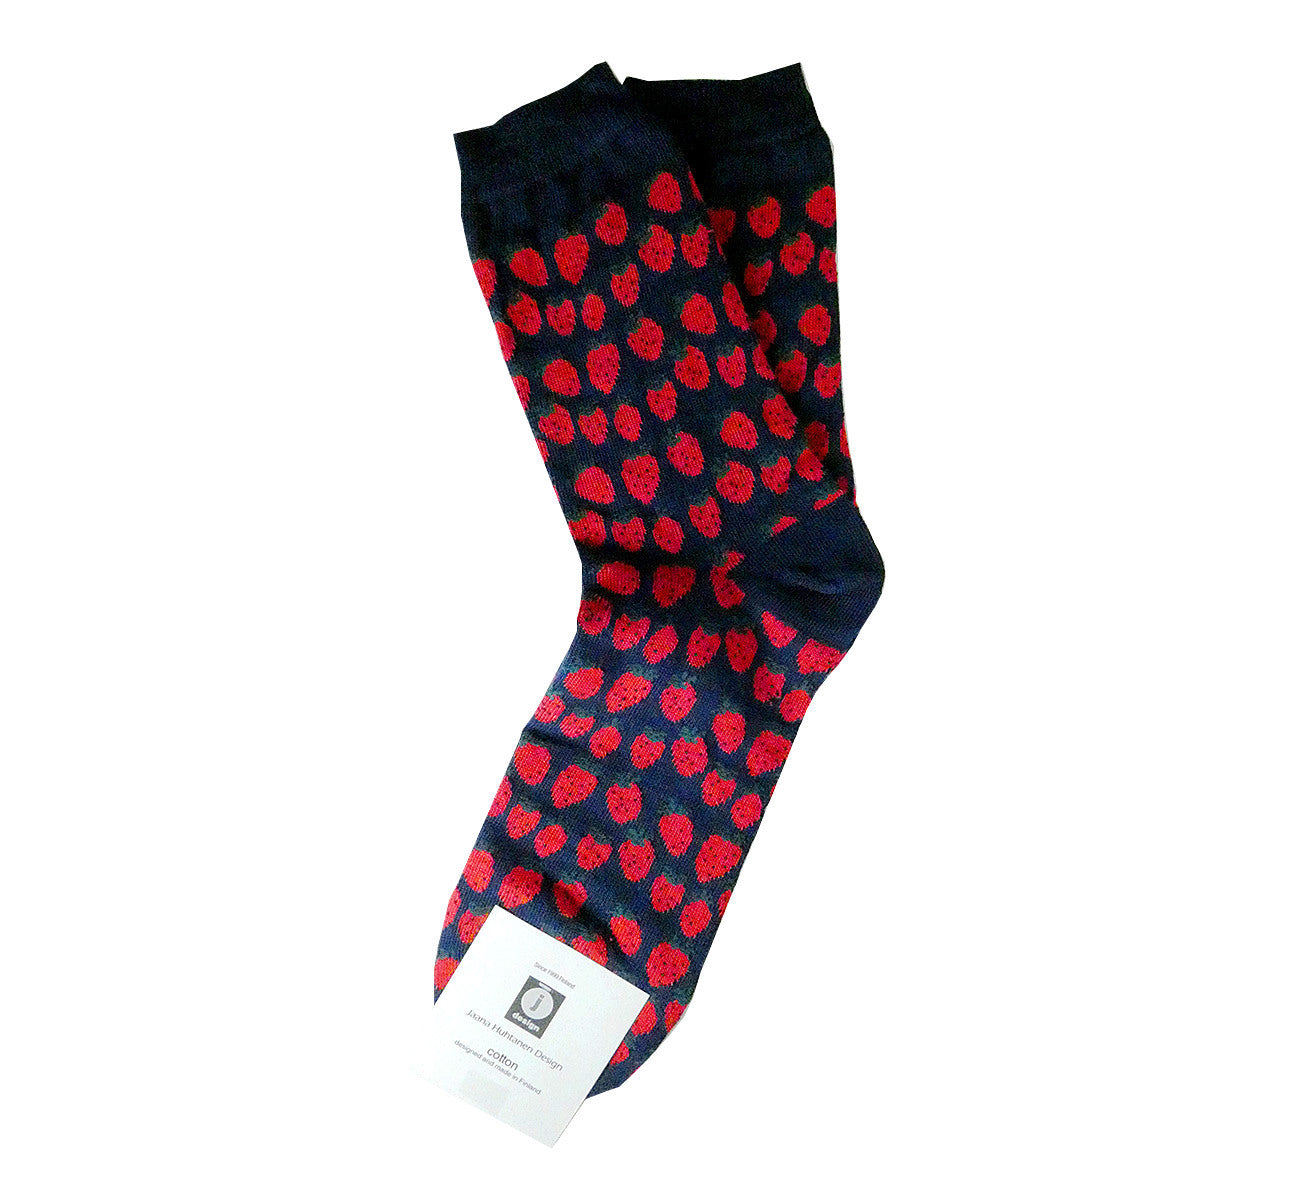 Pair of dark blue socks with many red strawberries, cuff and heel dark blue, breathable, resistant, ethically made in Scandinavia.